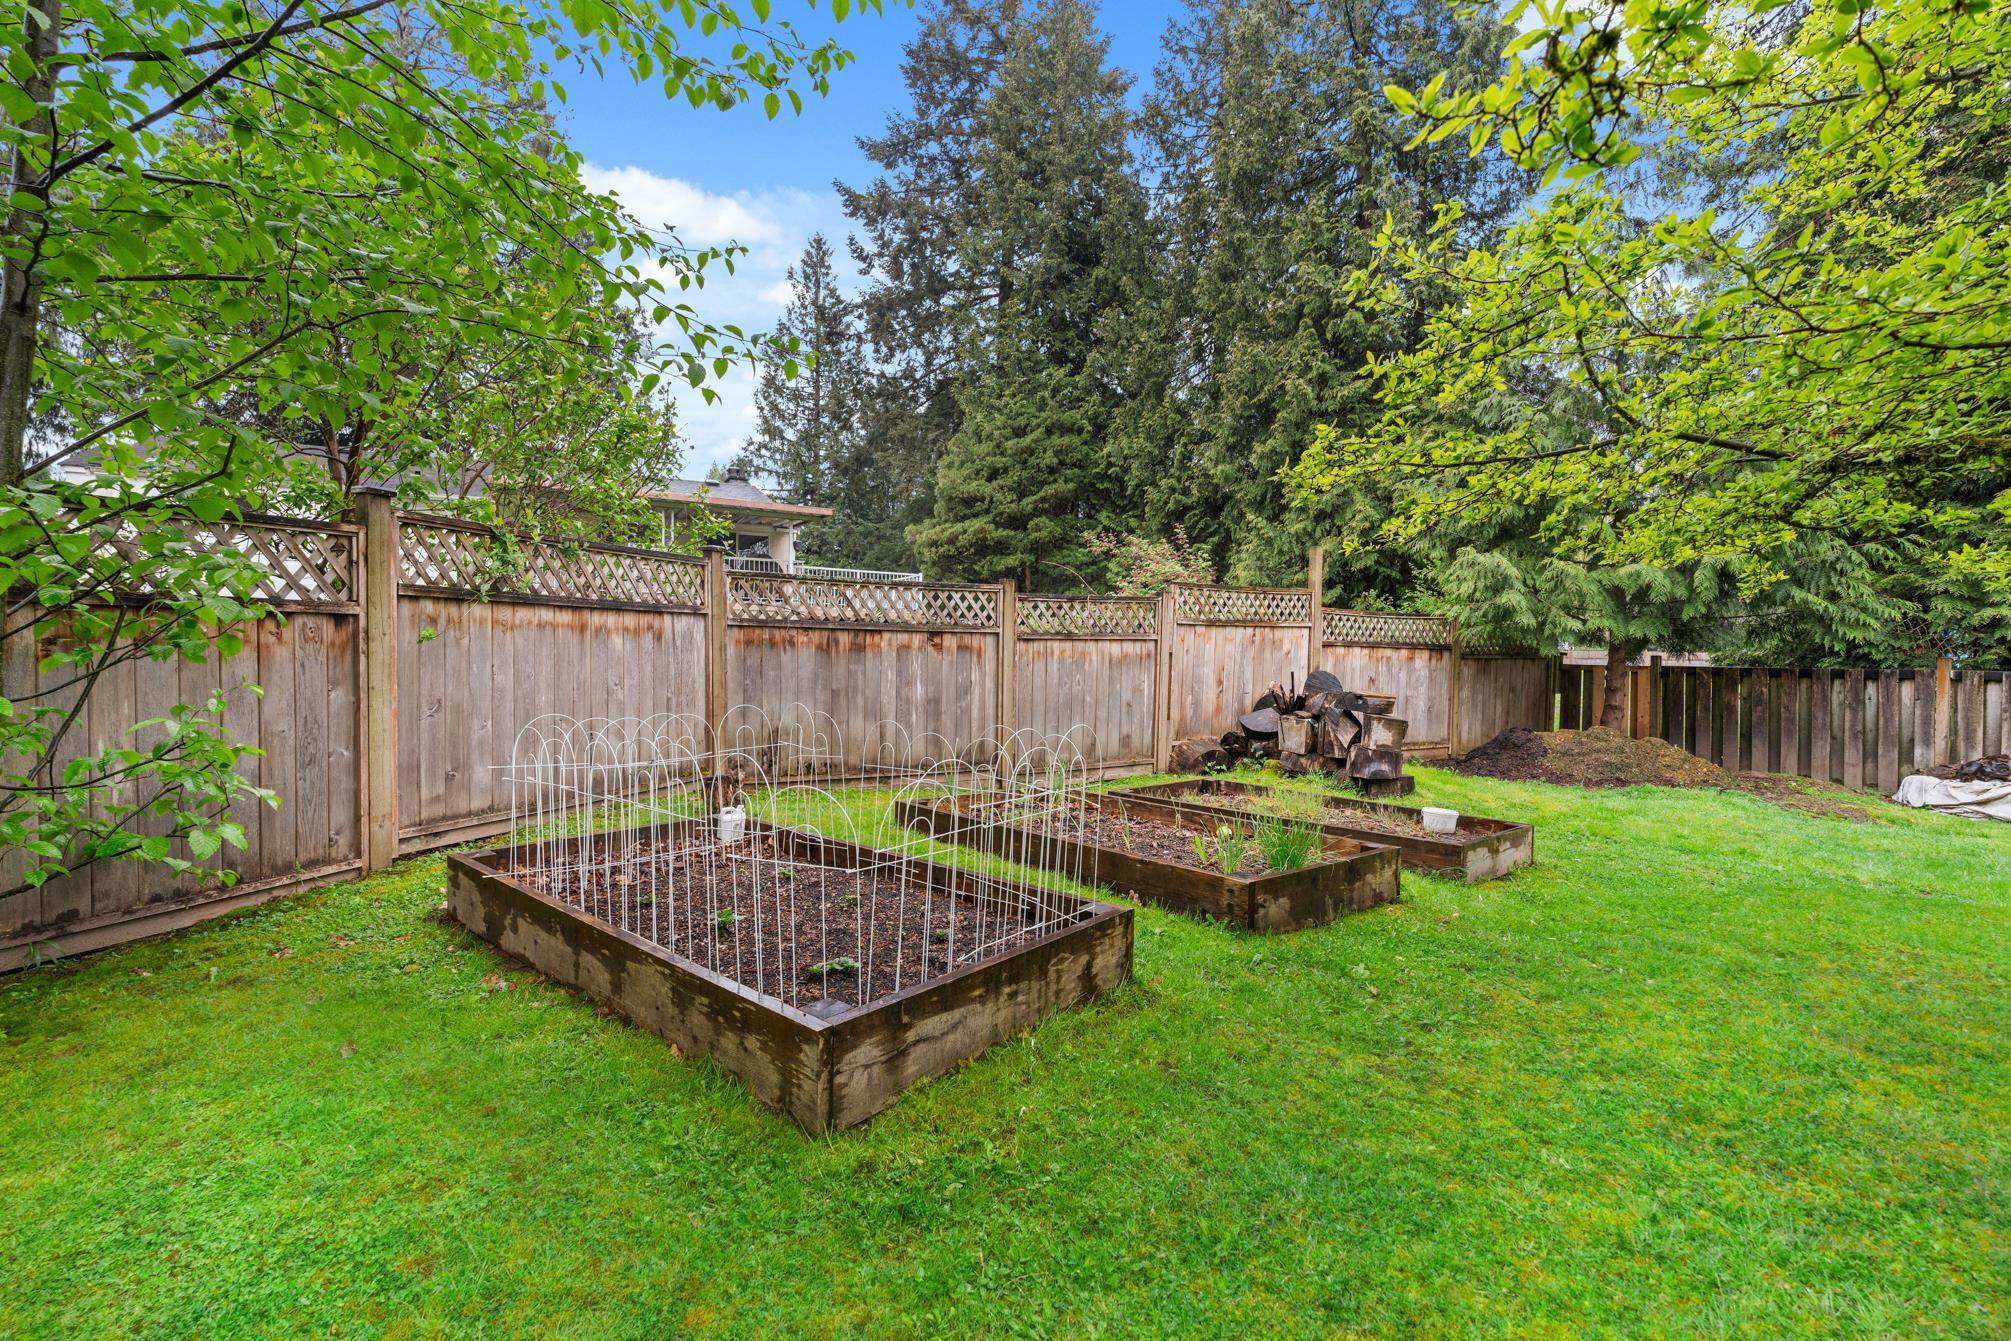 Listing image of 21676 SPRING CRESCENT